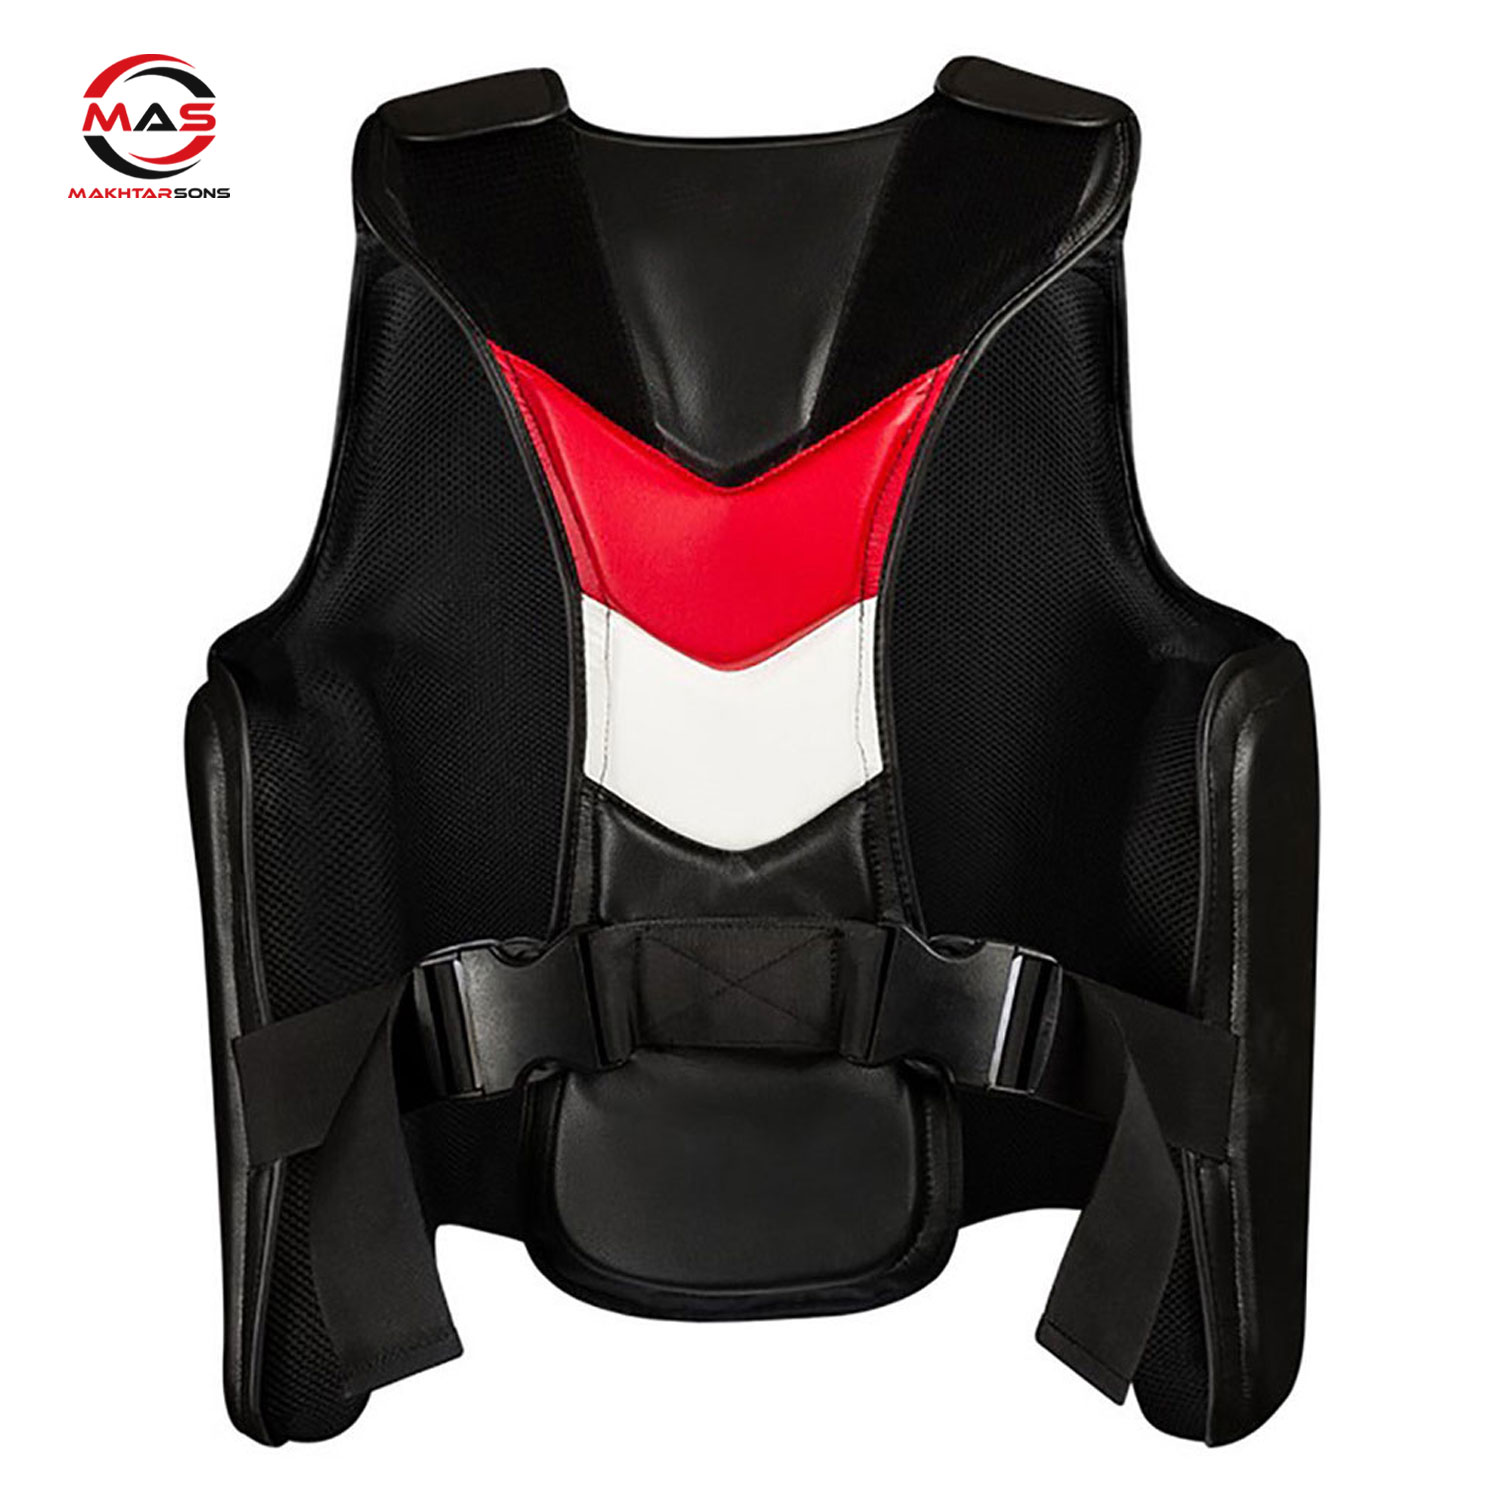 BODY CHEST PROTECTOR | MAS 279